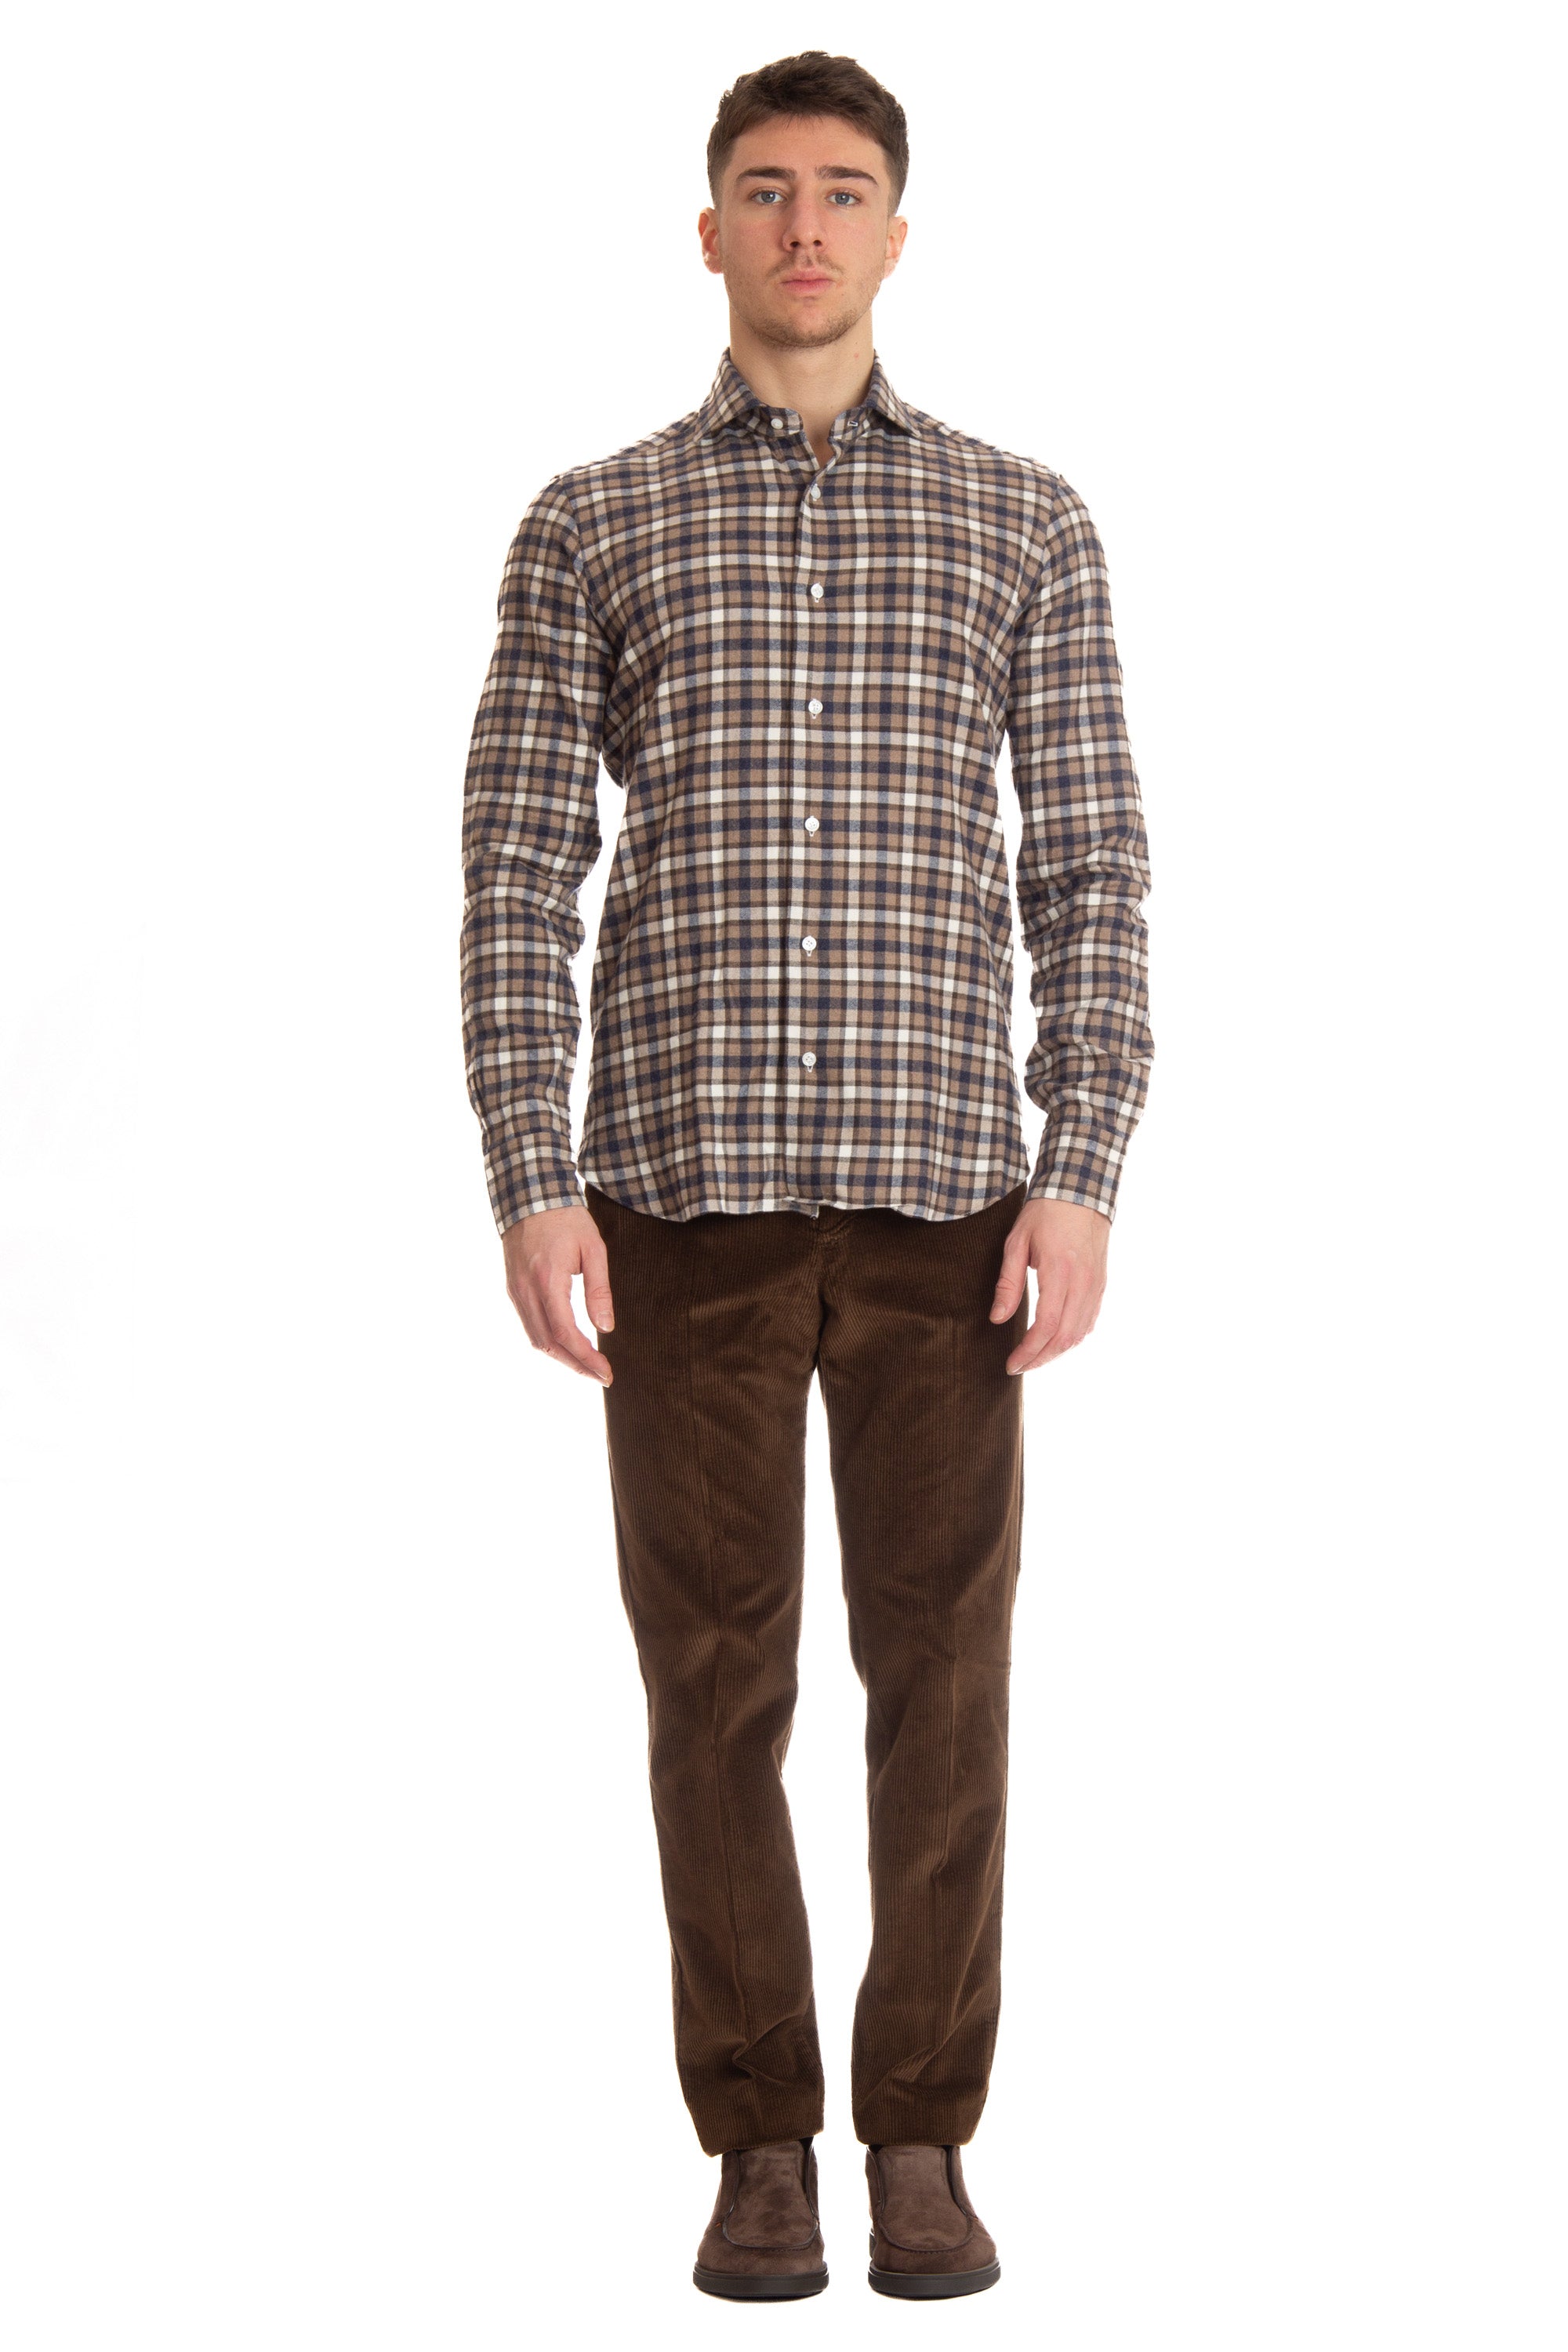 Dandylife label shirt with check pattern